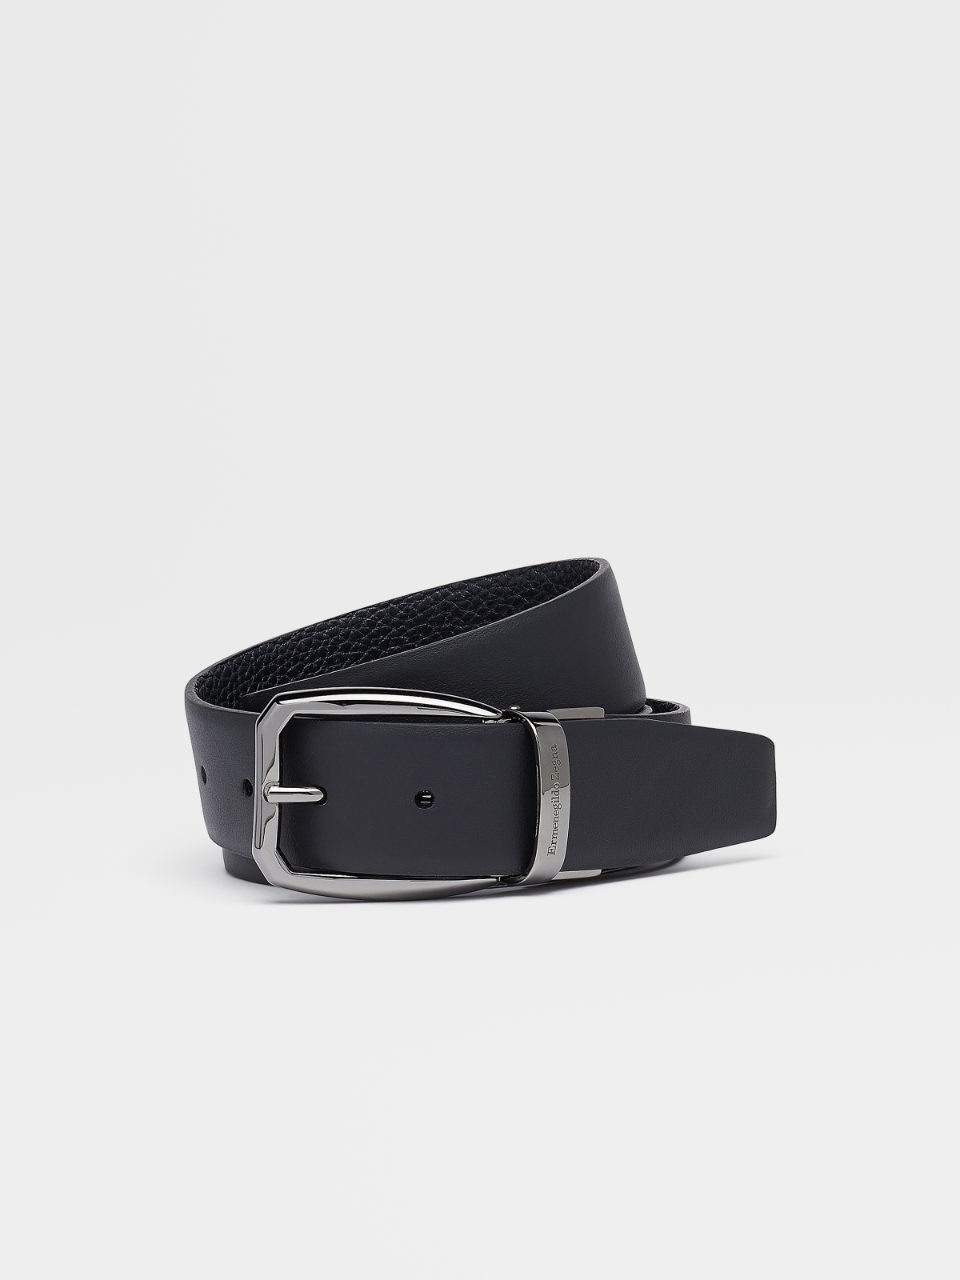 Navy Blue Smooth and Grained Leather Reversible Belt